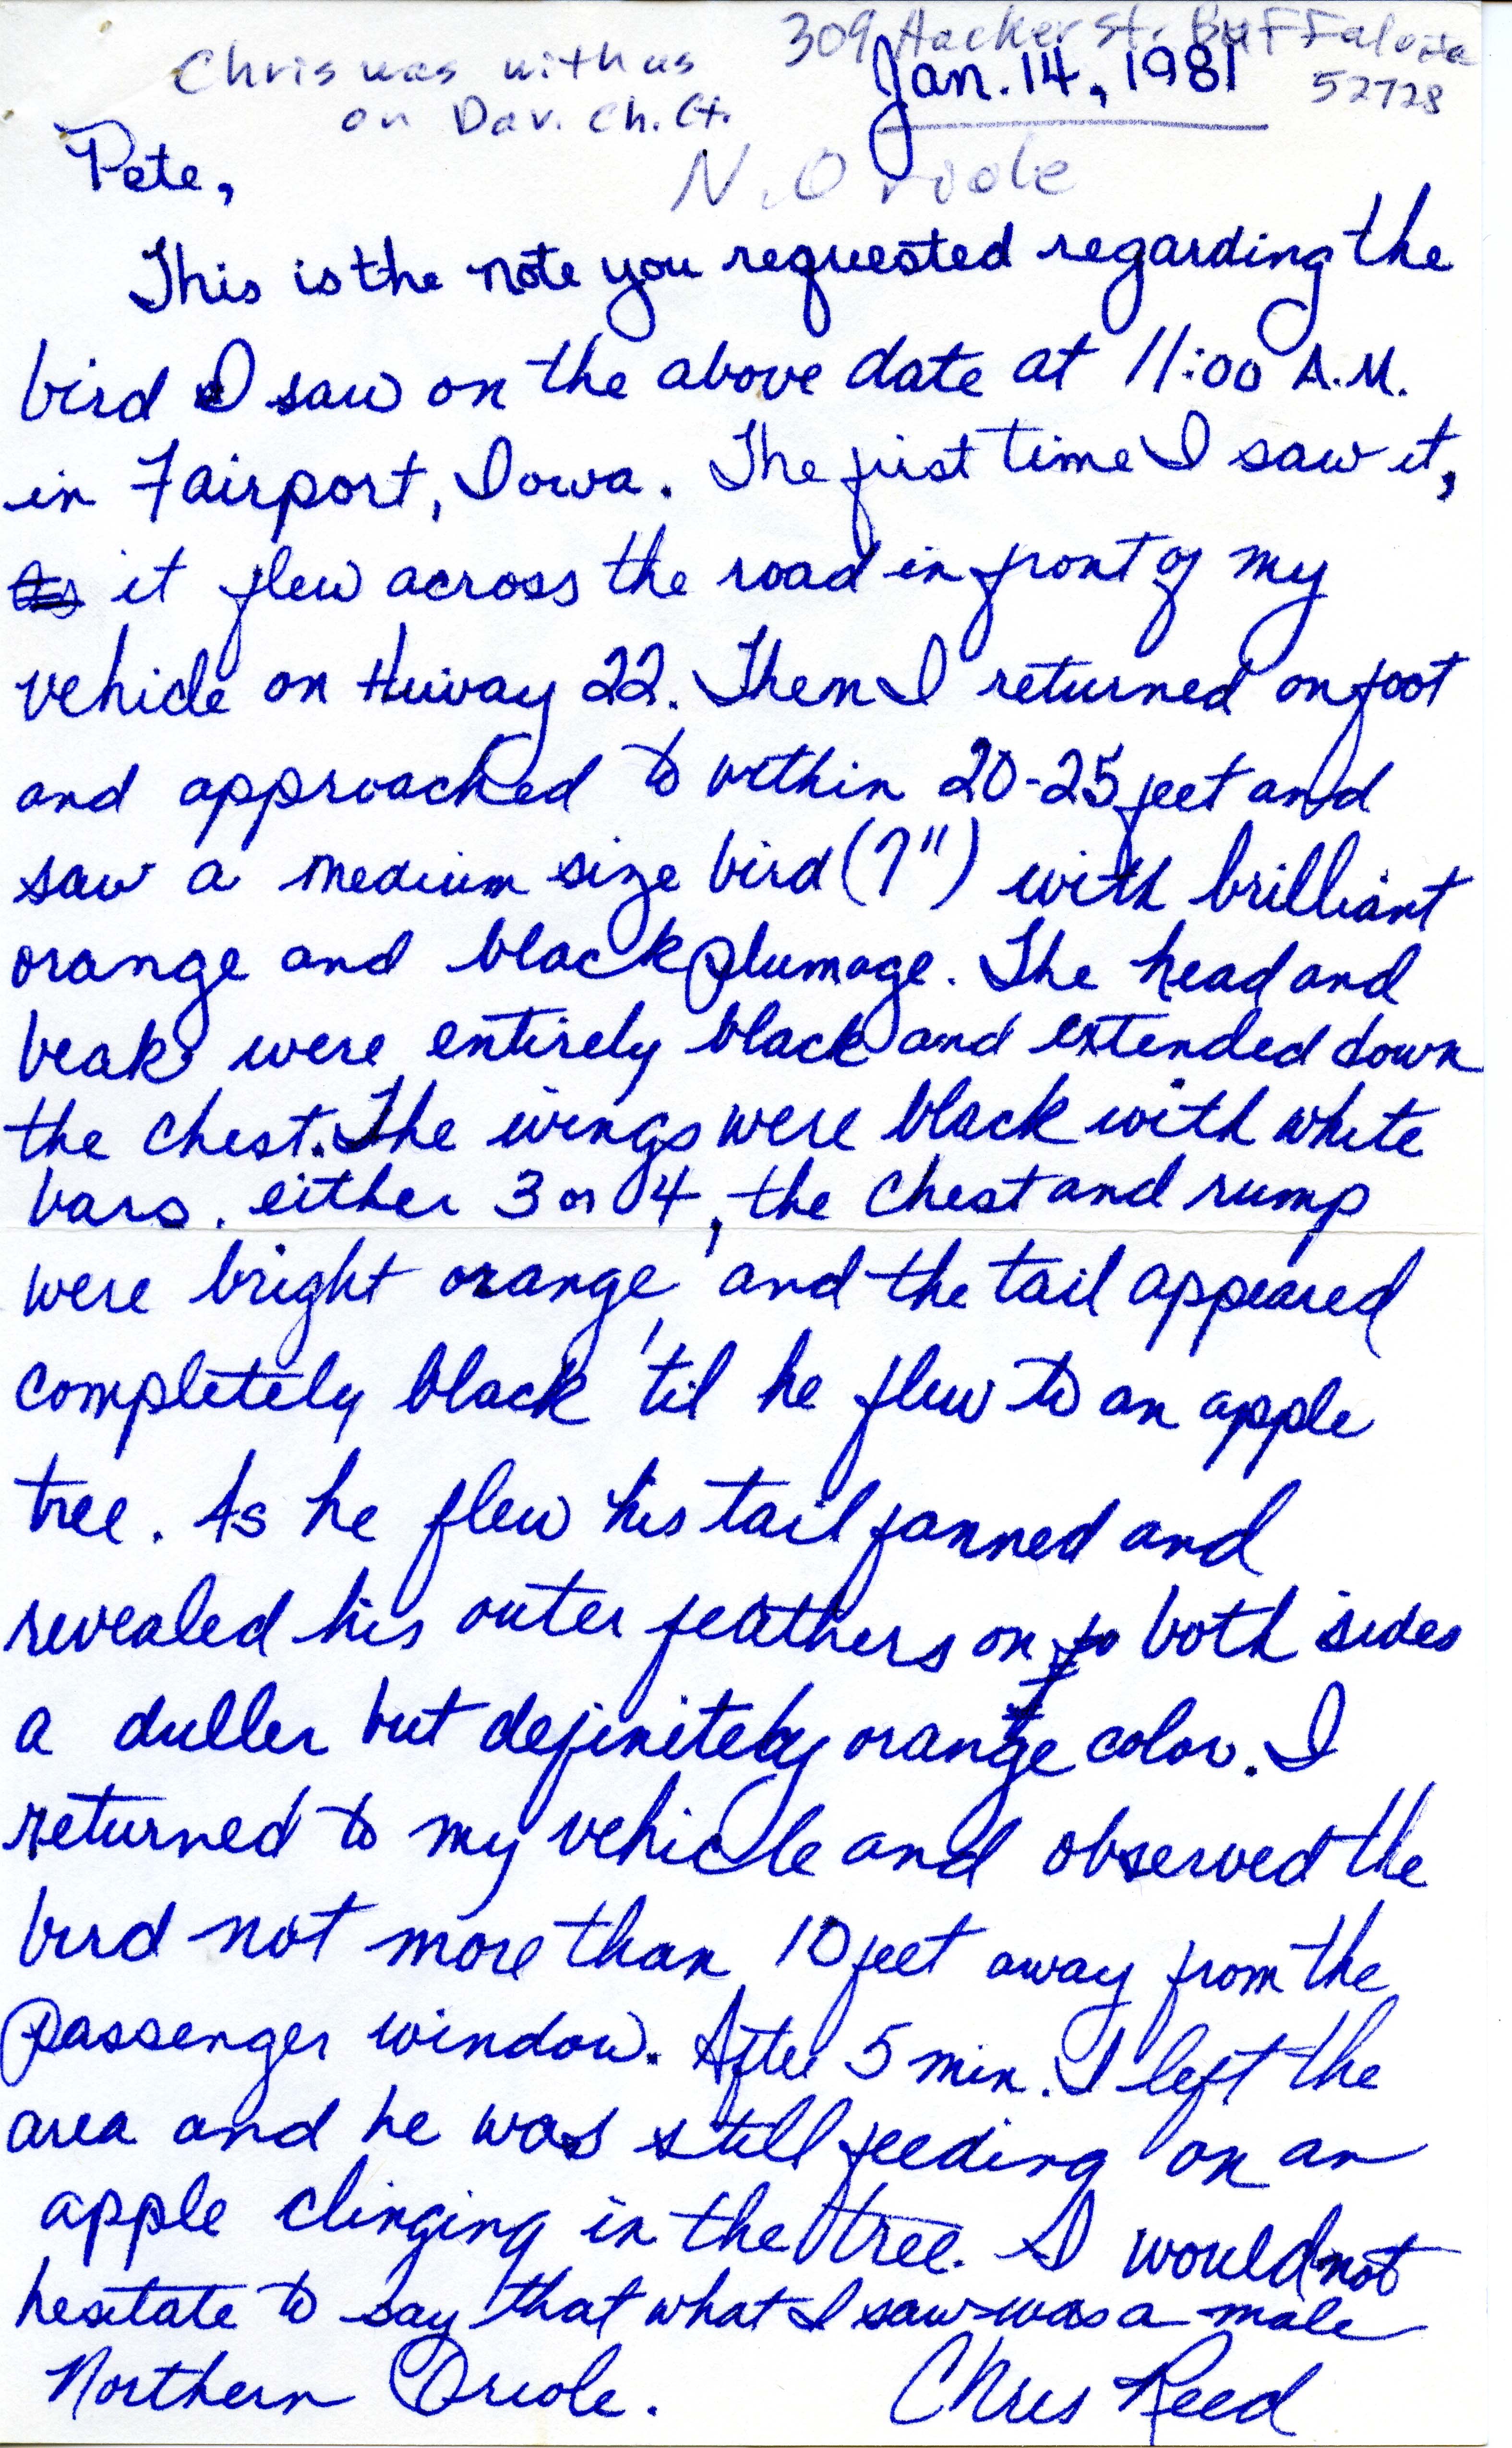 Chris Reed letter to Pete Petersen regarding Northern Oriole sighting, January 14, 1981